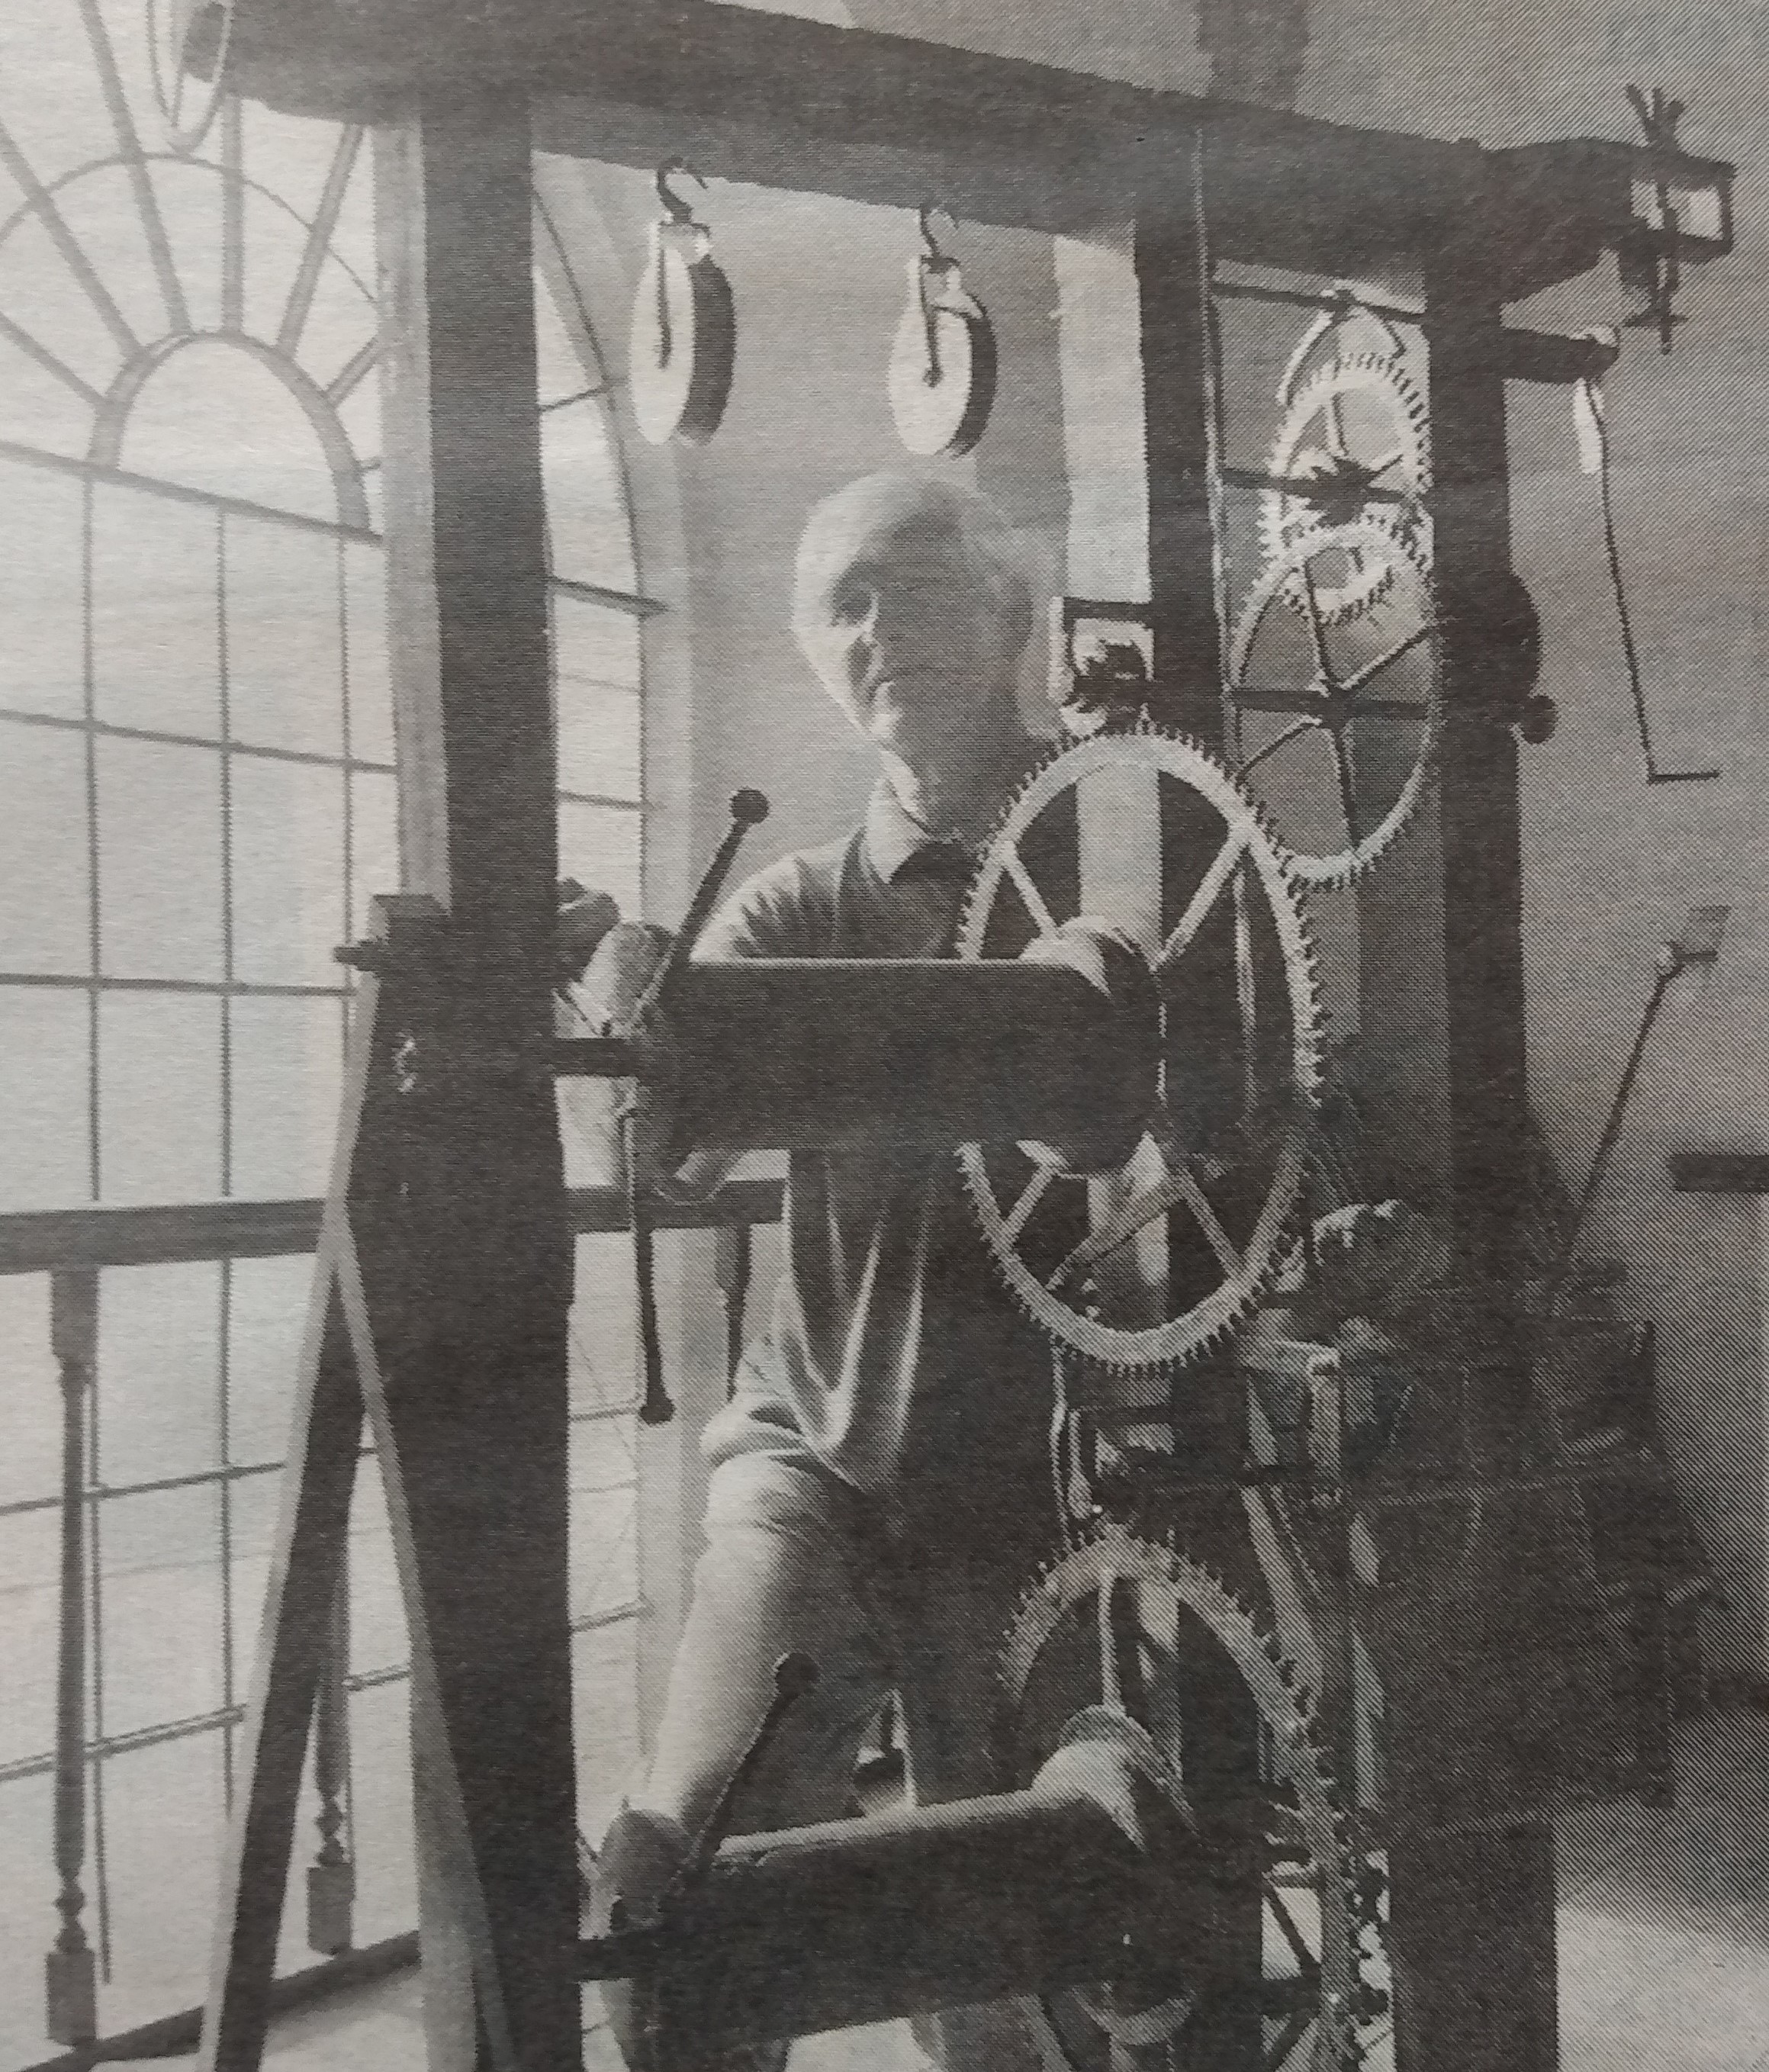 This picture comes from July 1995 and shows Peter Averis with the clock he restored after finding it in the tower of Old St Martin’s Church